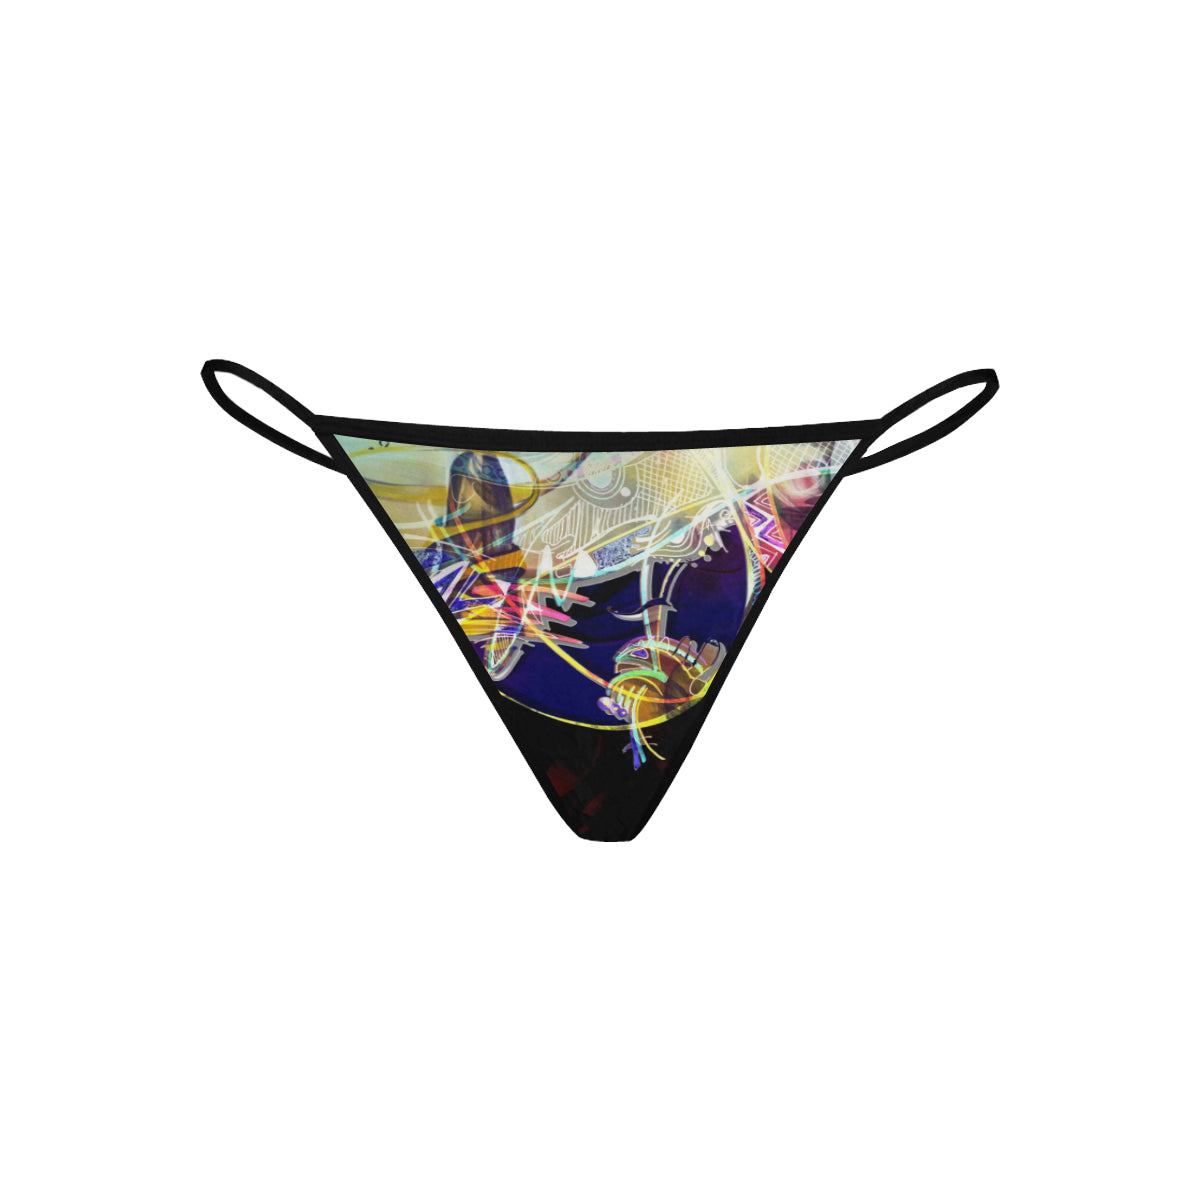 String thong "Doubout"